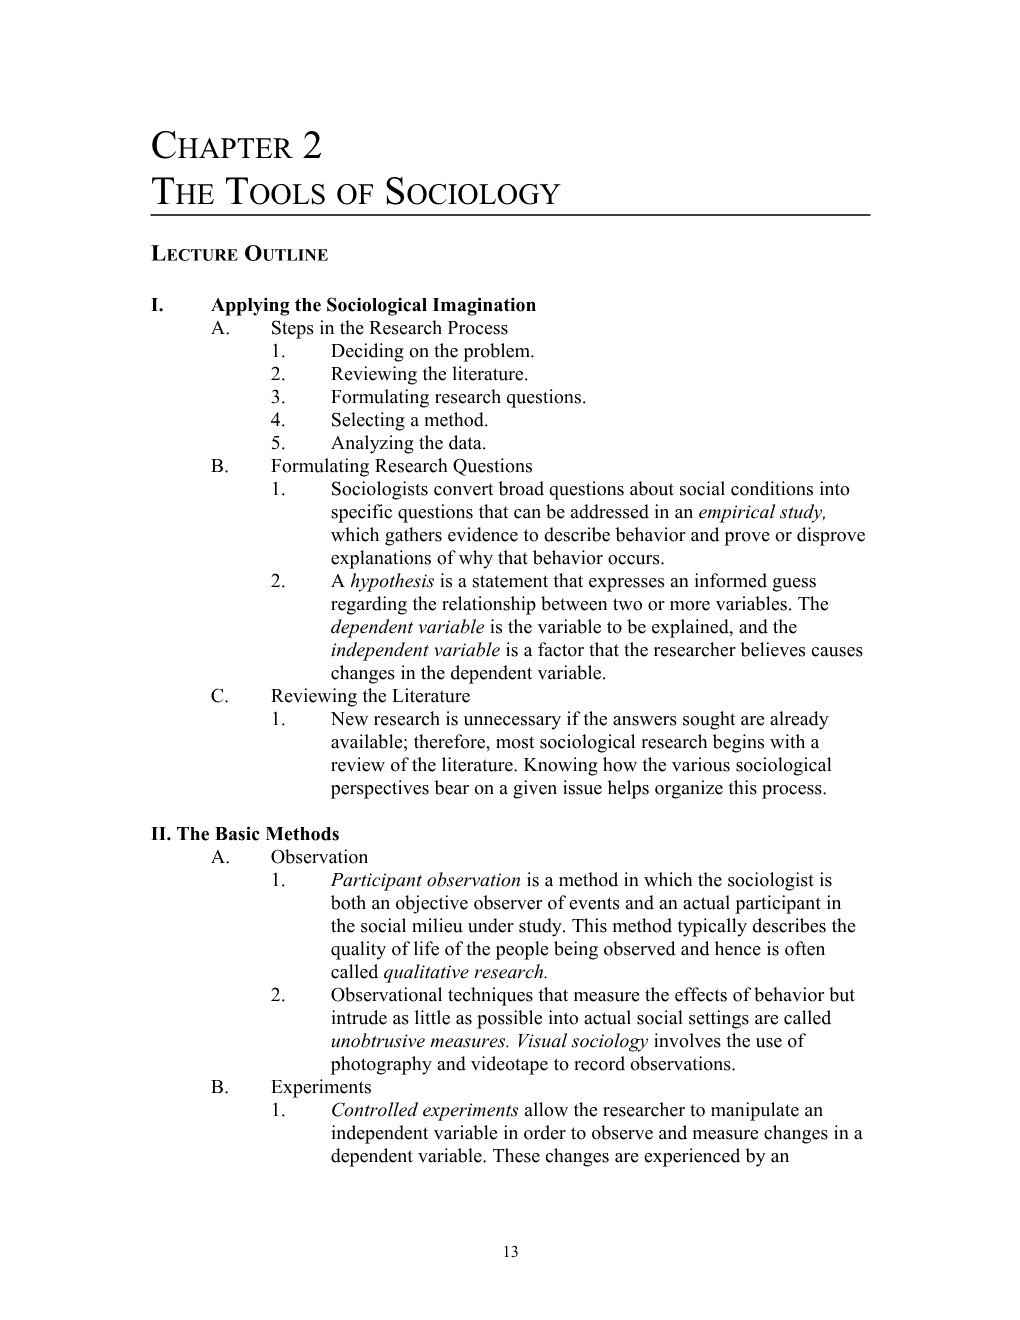 CHAPTER 2 the Tools of Sociology